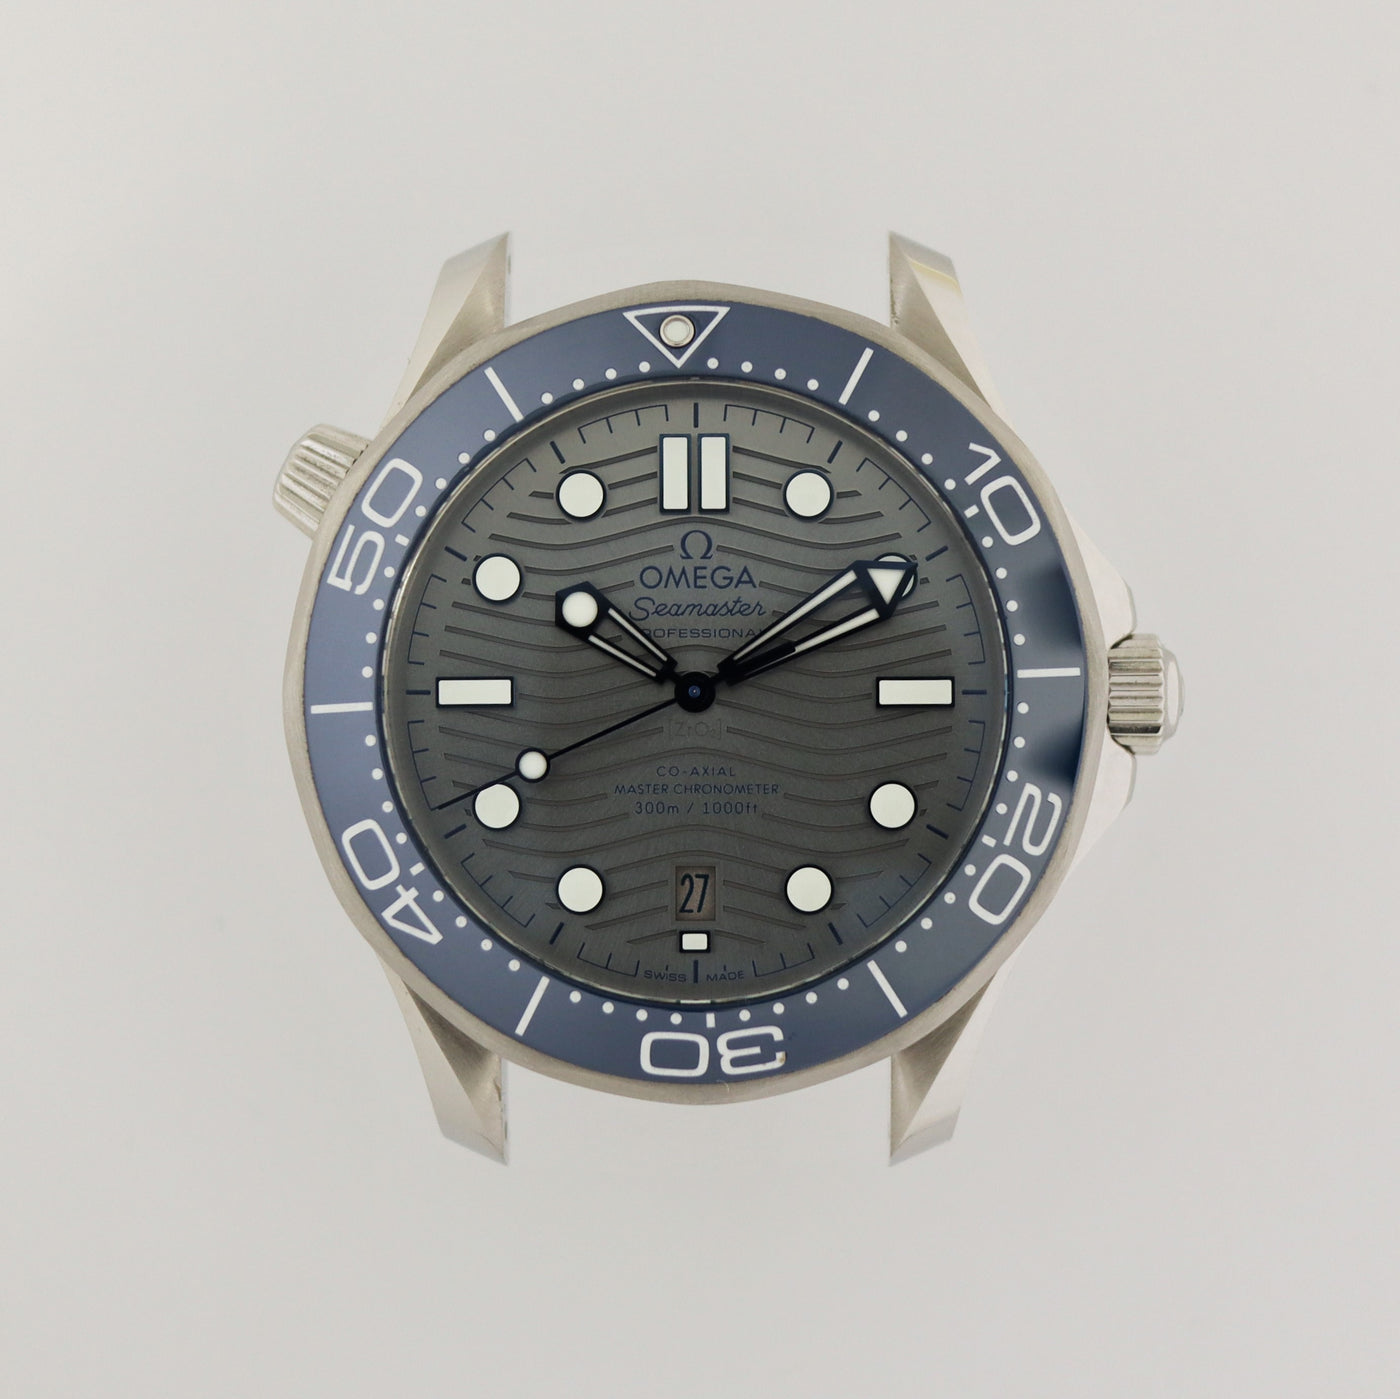 Omega Seamaster 300 Co-Axial Master Chronometer (sold)